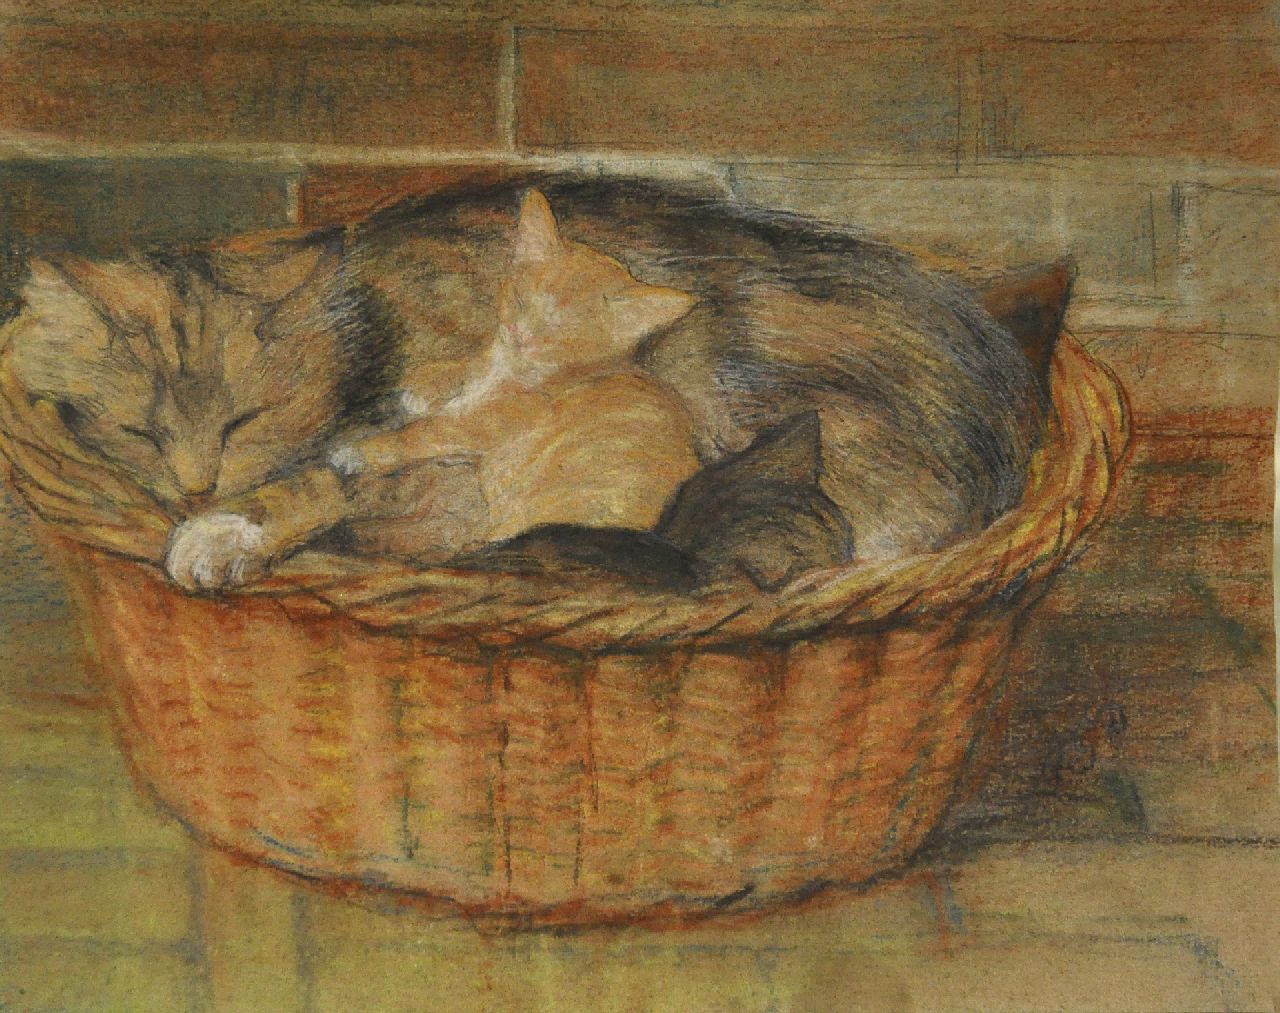 Dyserinck A.G.  | Adrienne Gertrude 'Attie' Dyserinck, Sleeping cat and kittens in a basket, pastel on paper 31.9 x 40.0 cm, signed l.r. with initials